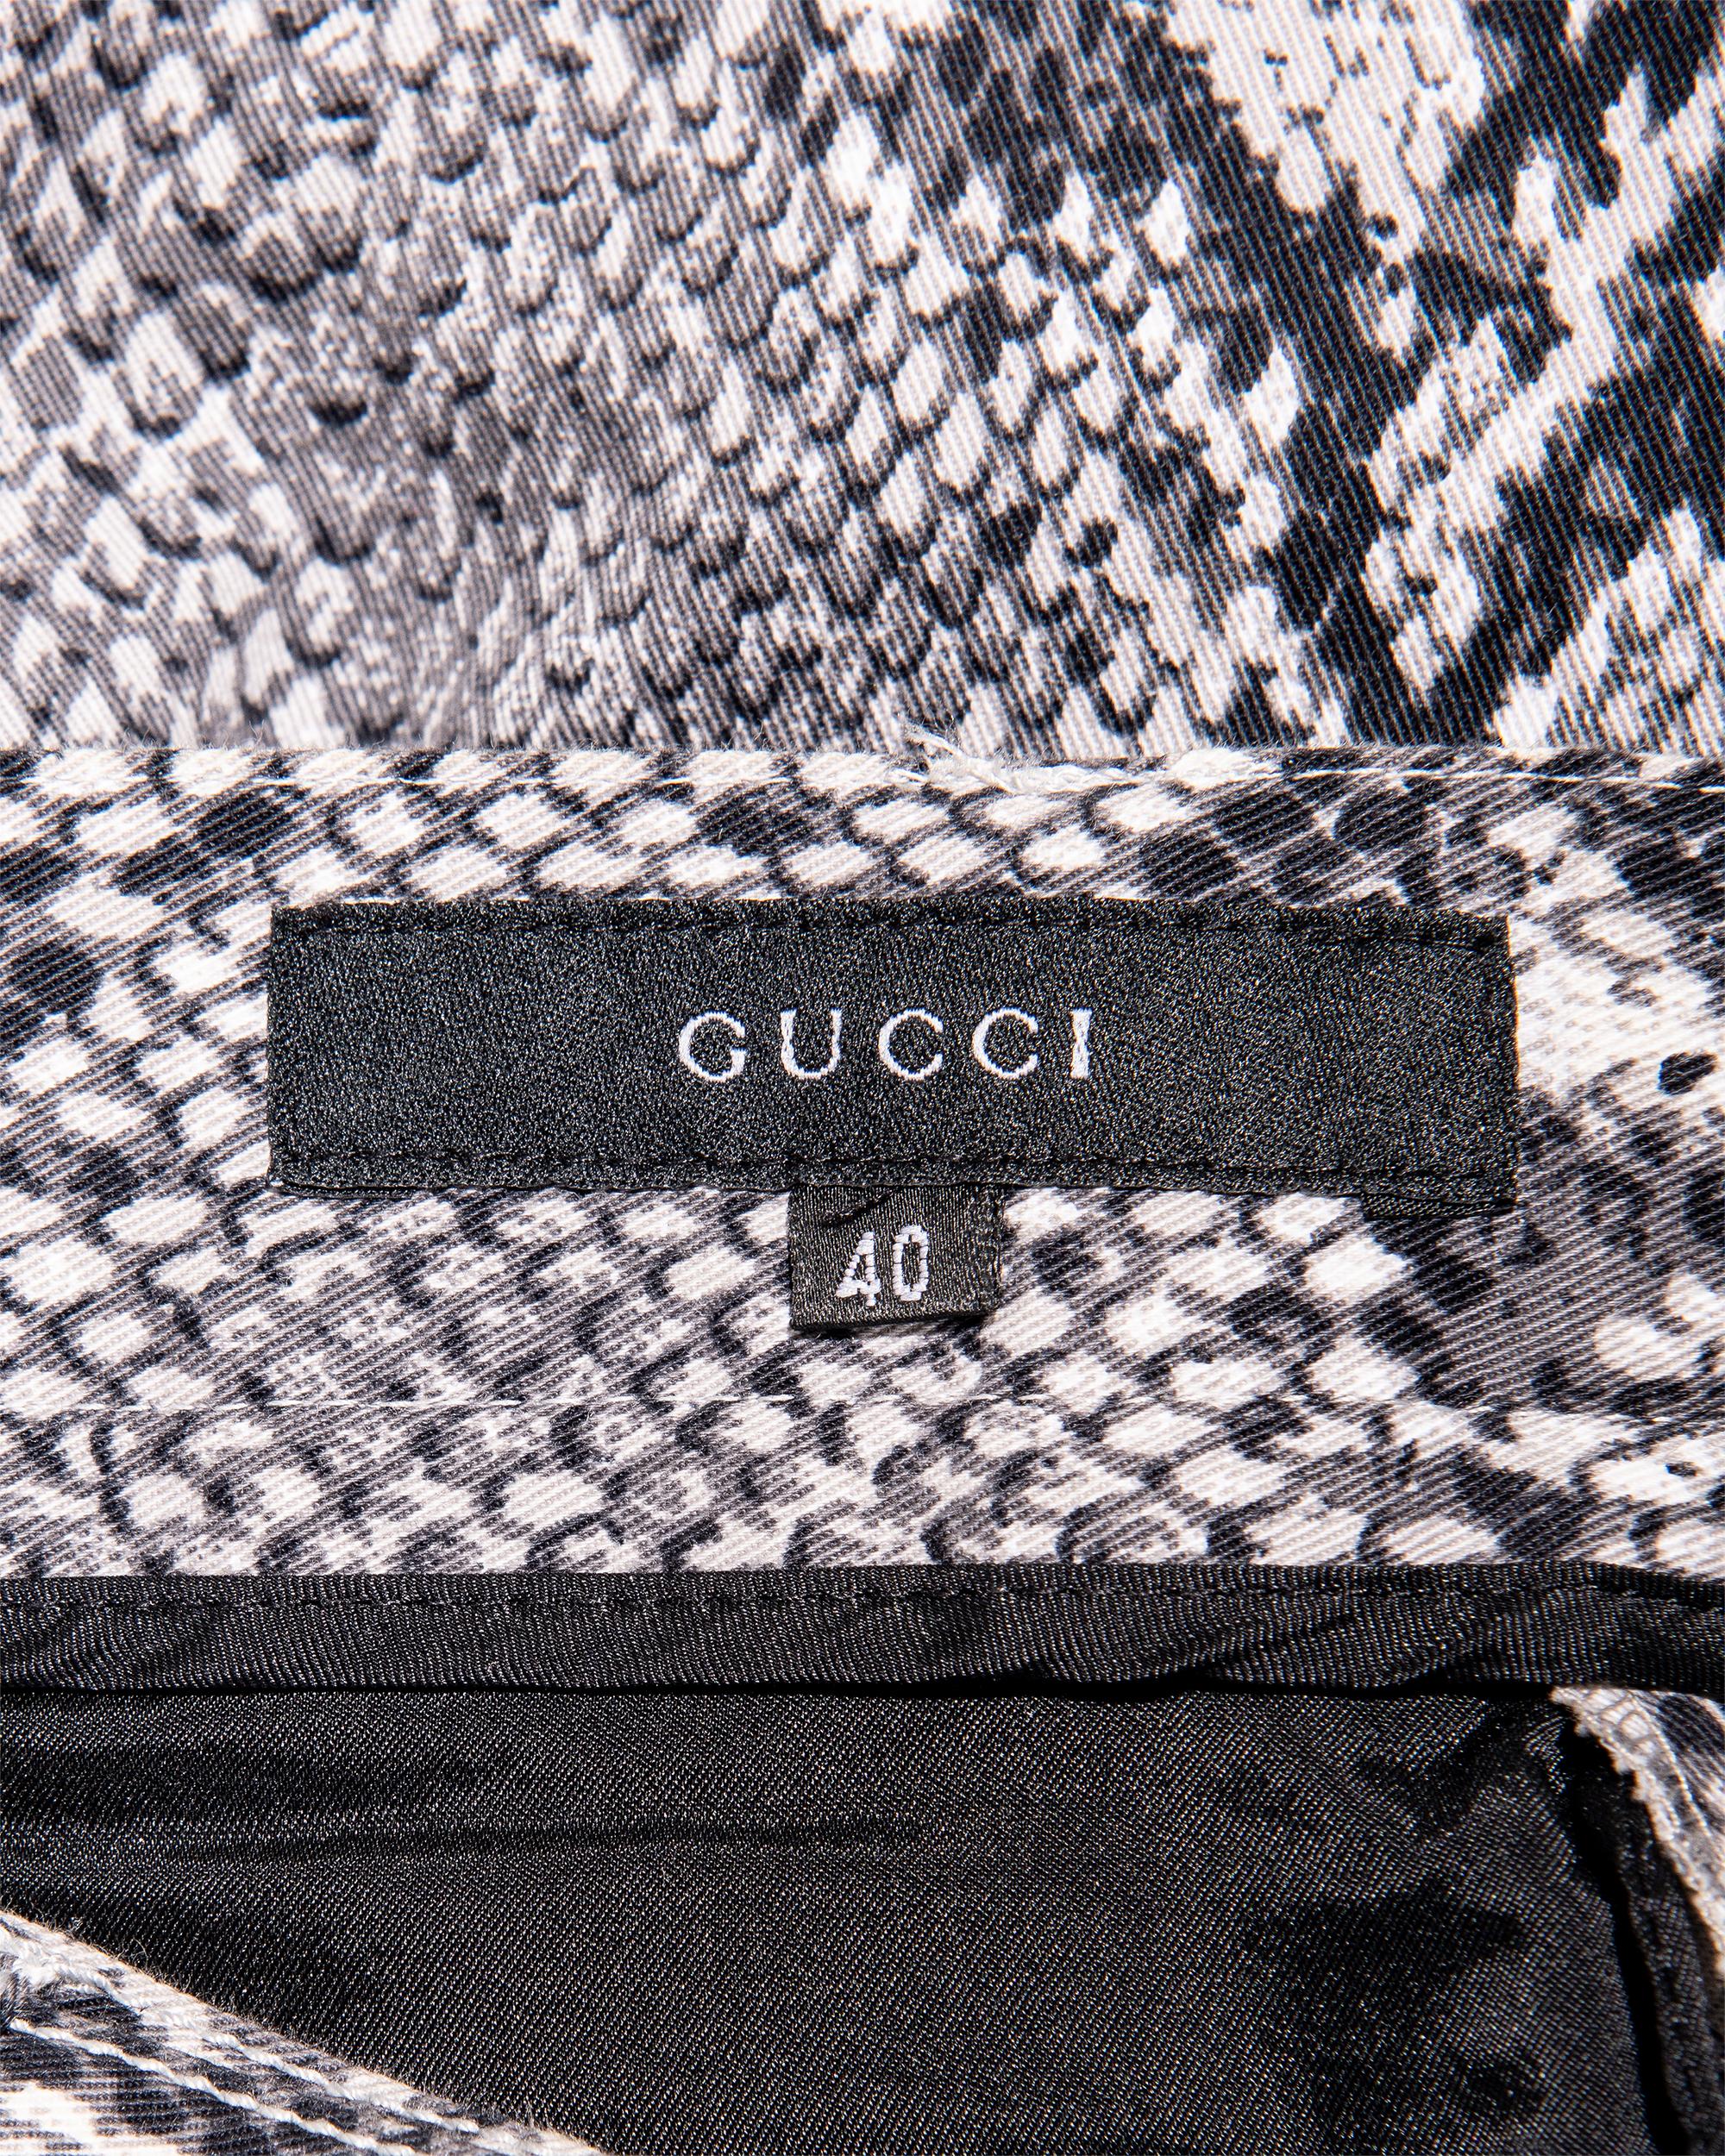 S/S 2000 Gucci by Tom Ford Gray Snakeskin Flare Trousers 5